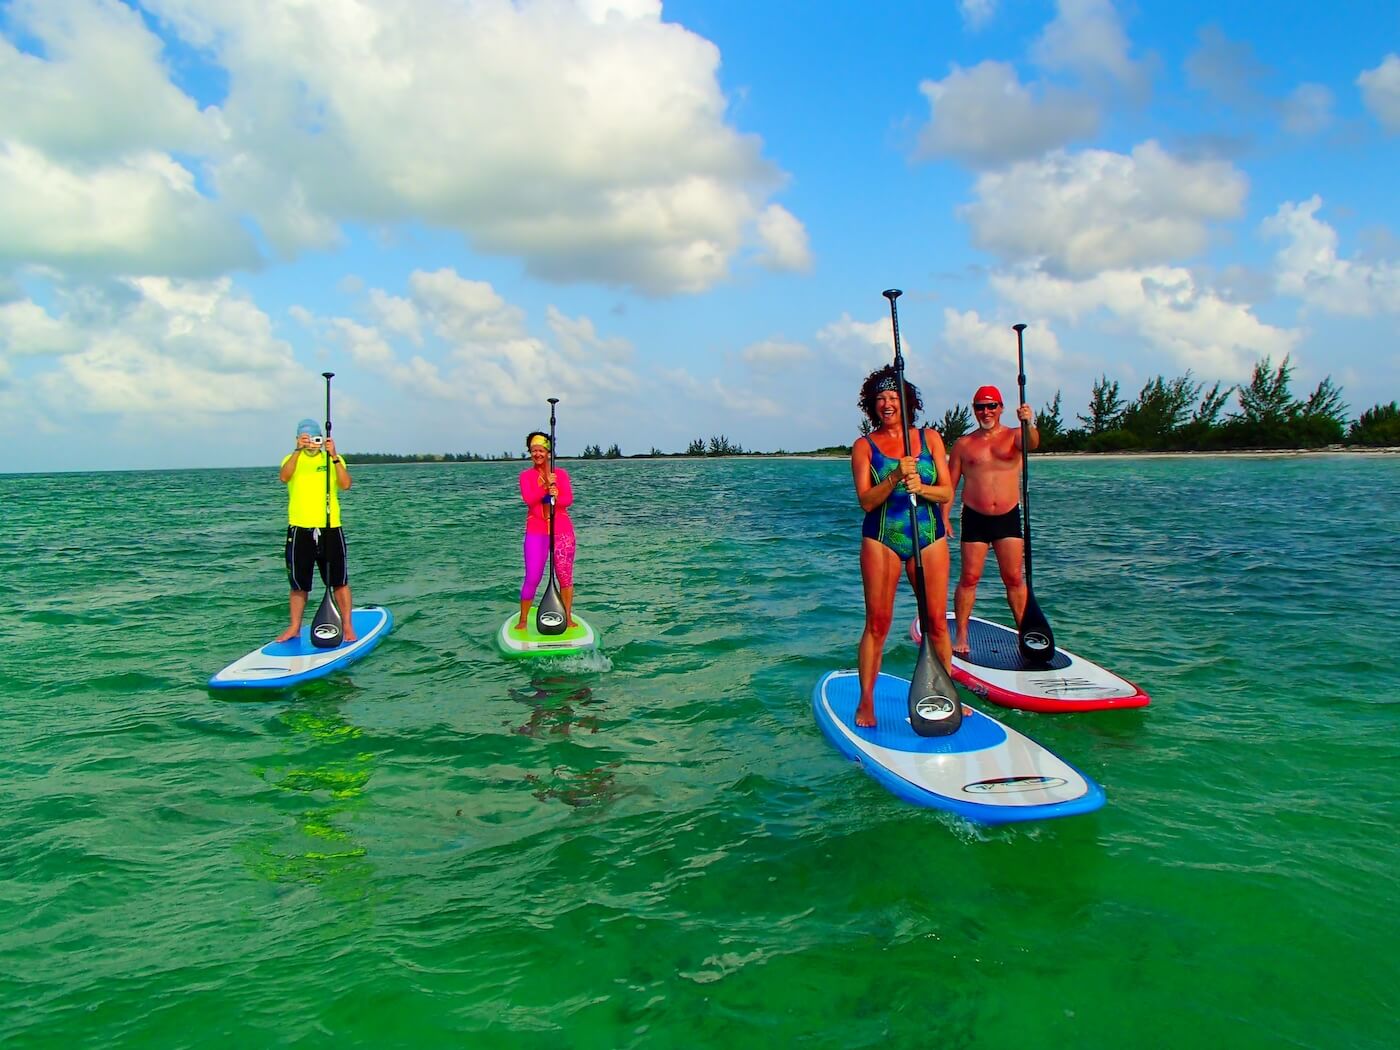 Four people stand-up paddleboarding